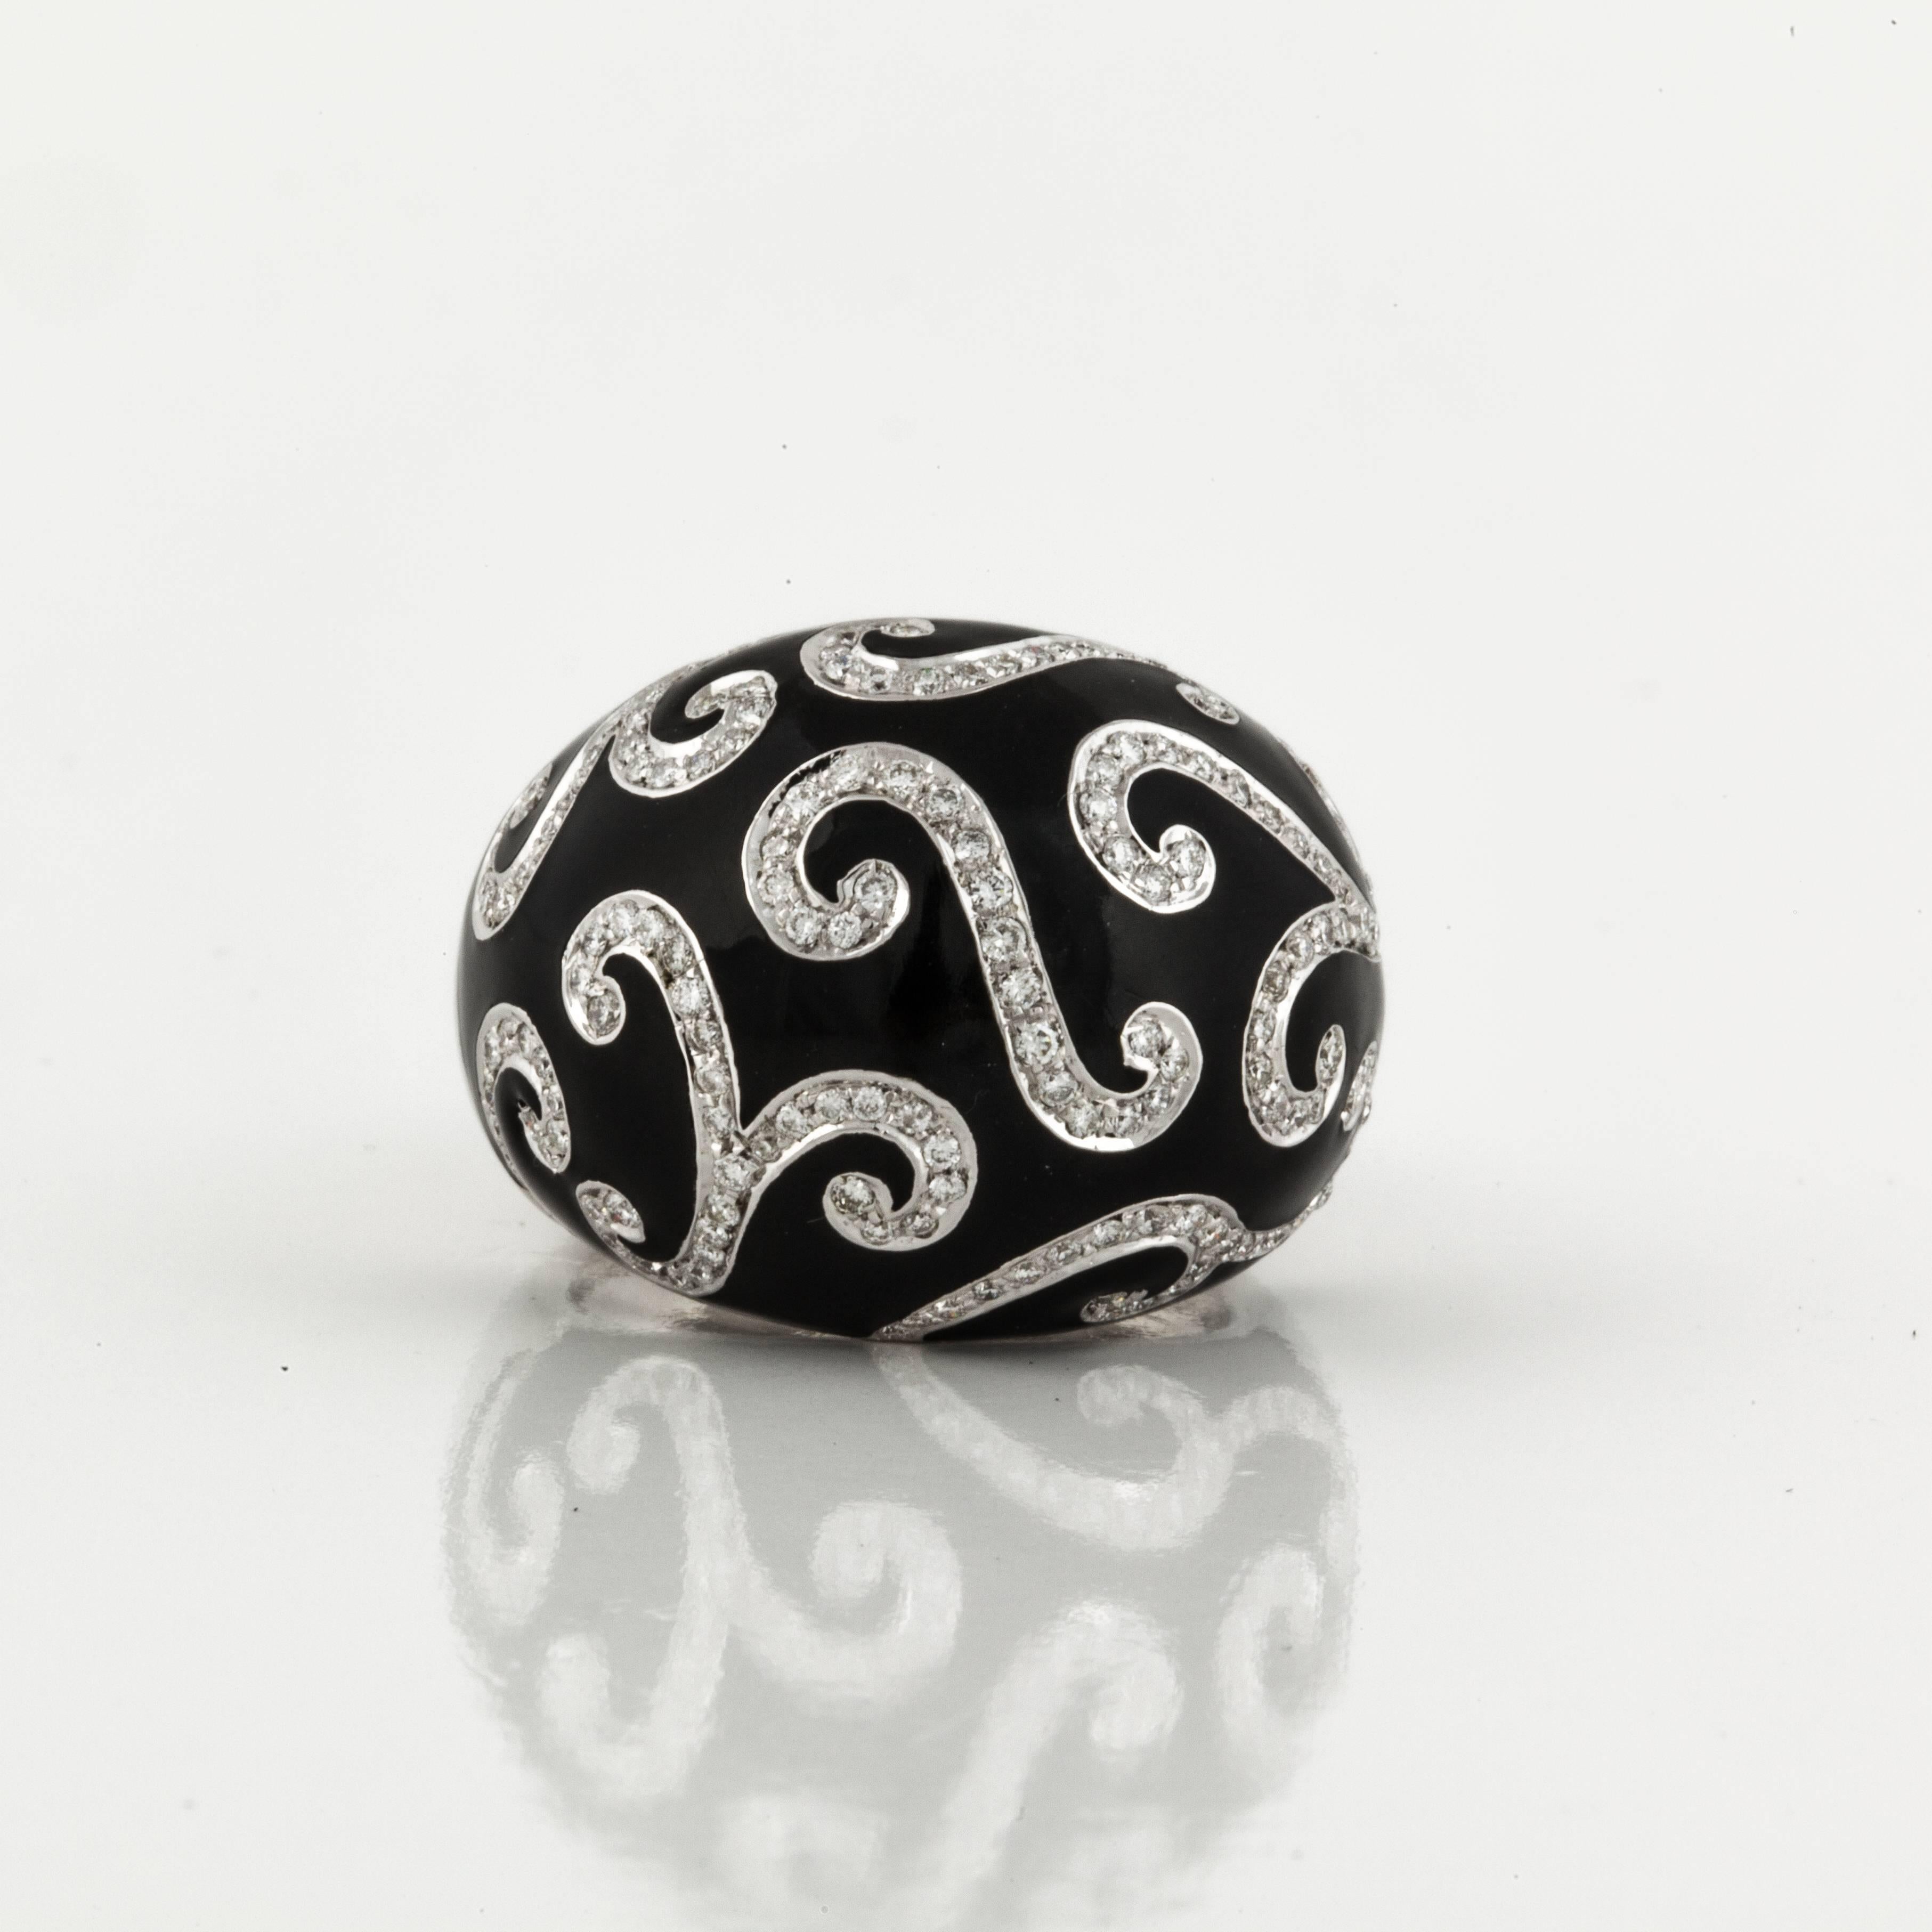 Roberto Legazzi 18K white gold black enamel dome ring with diamonds.  The ring is marked on the inside 